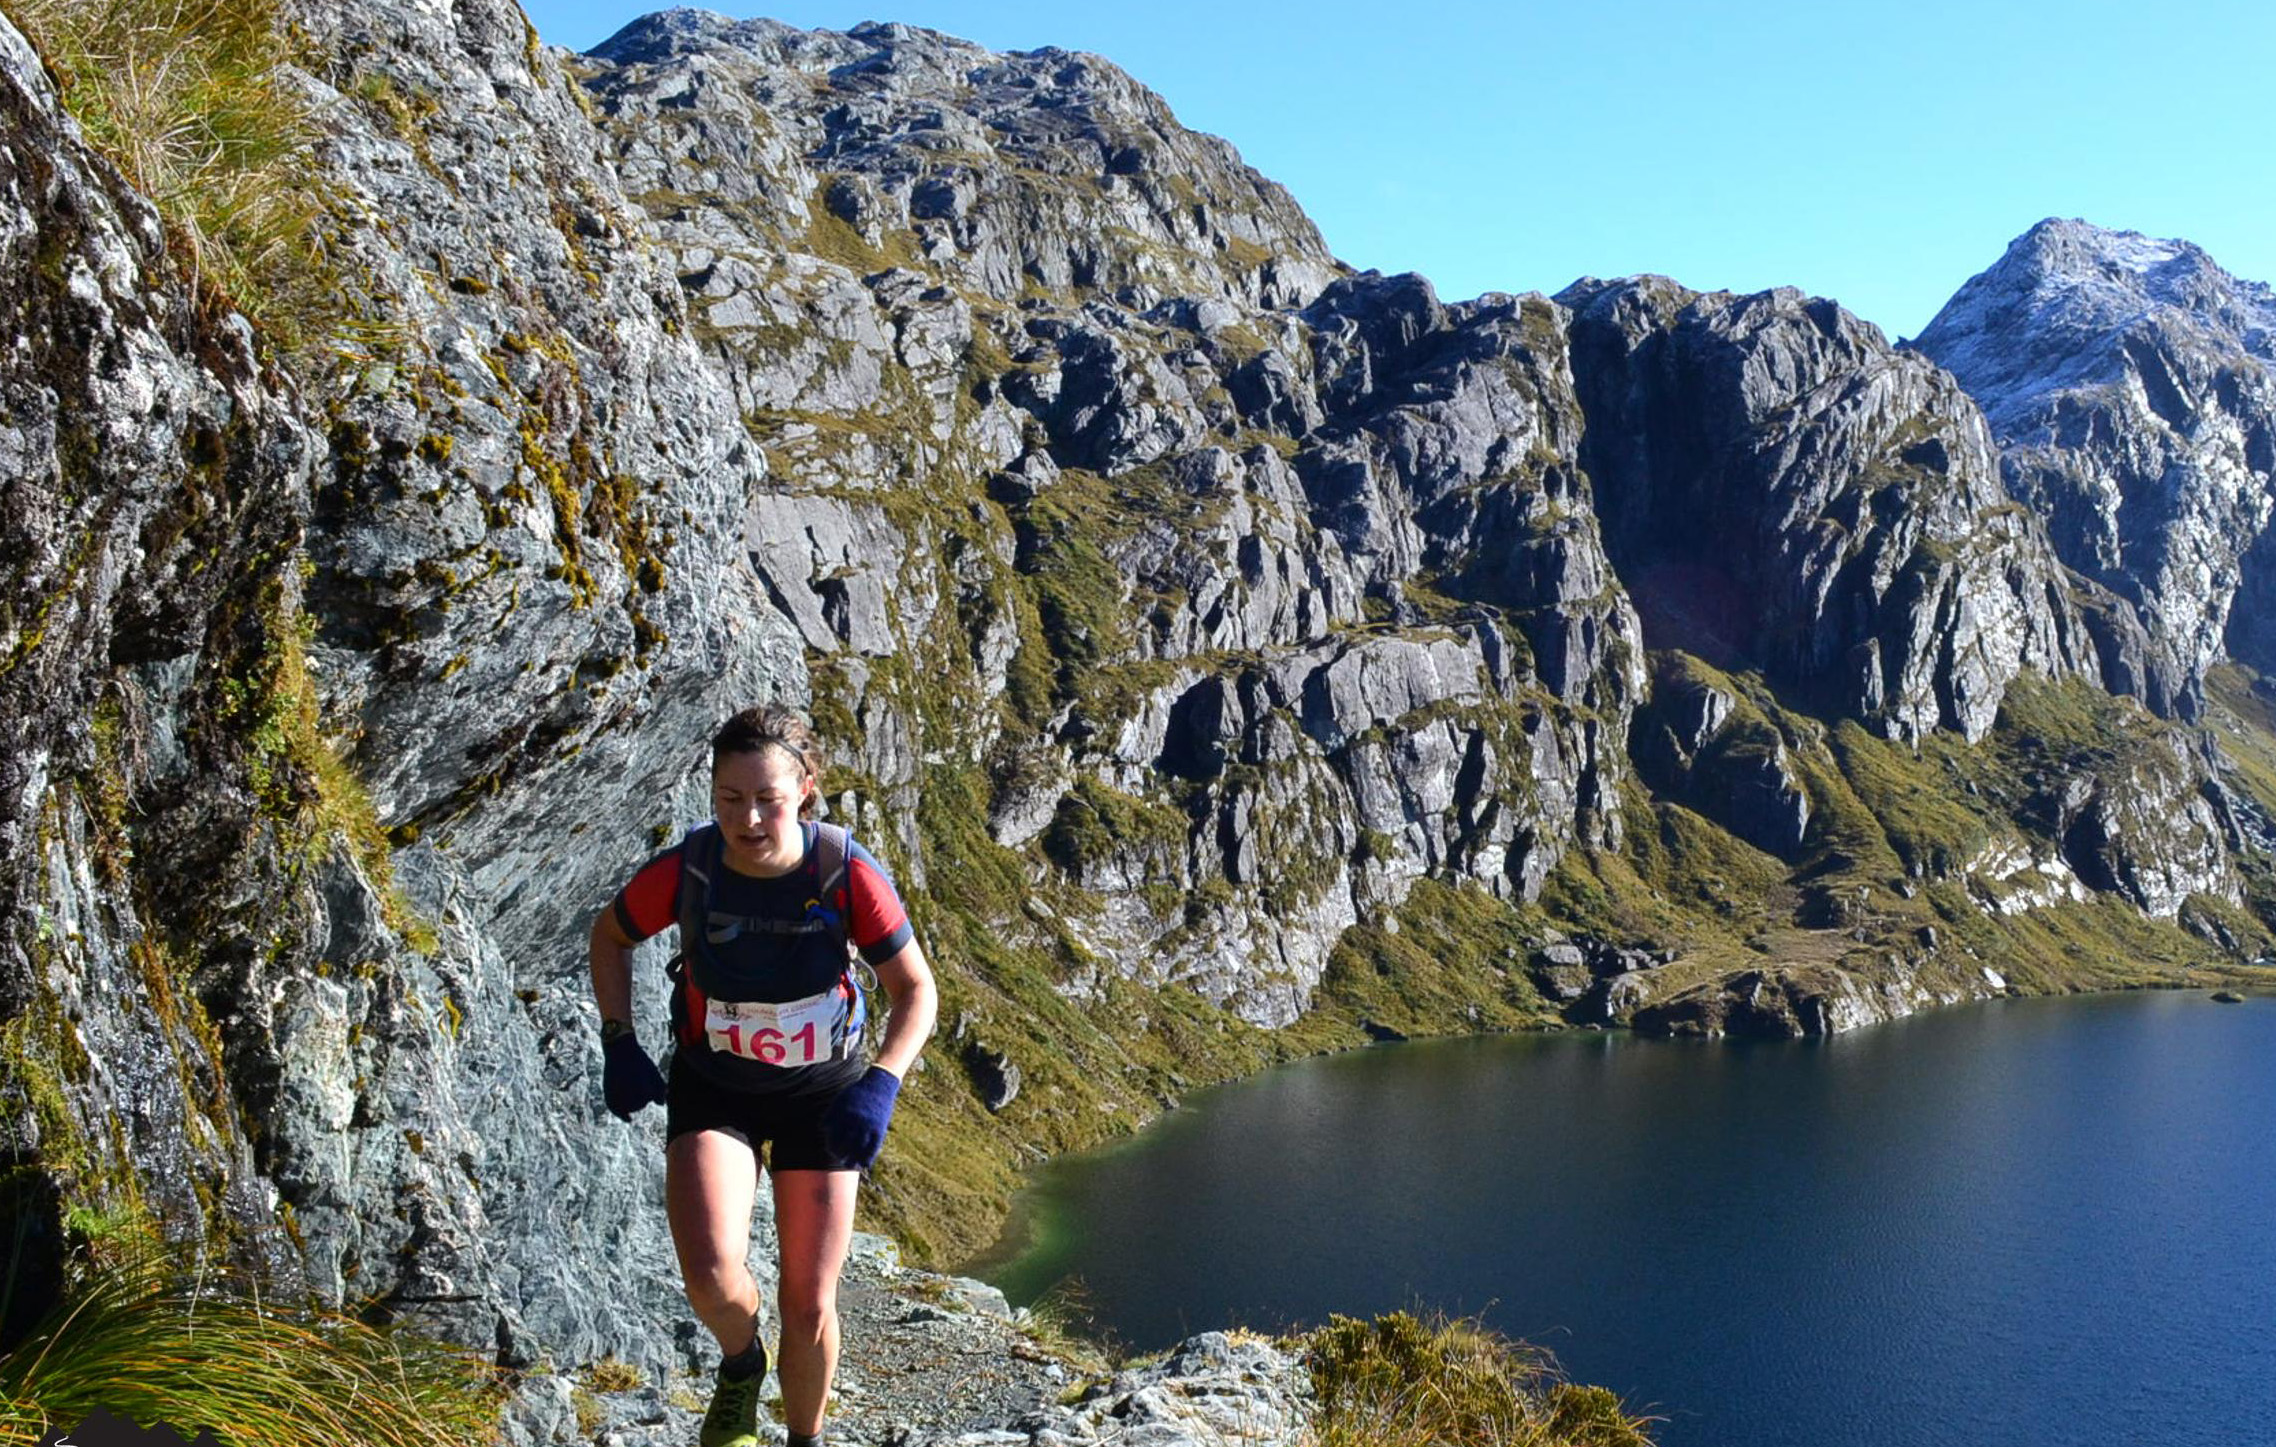 Torpedo7 athlete Fiona Dowling knows the benefits of running with a pack as she tackles the Routeburn Classic